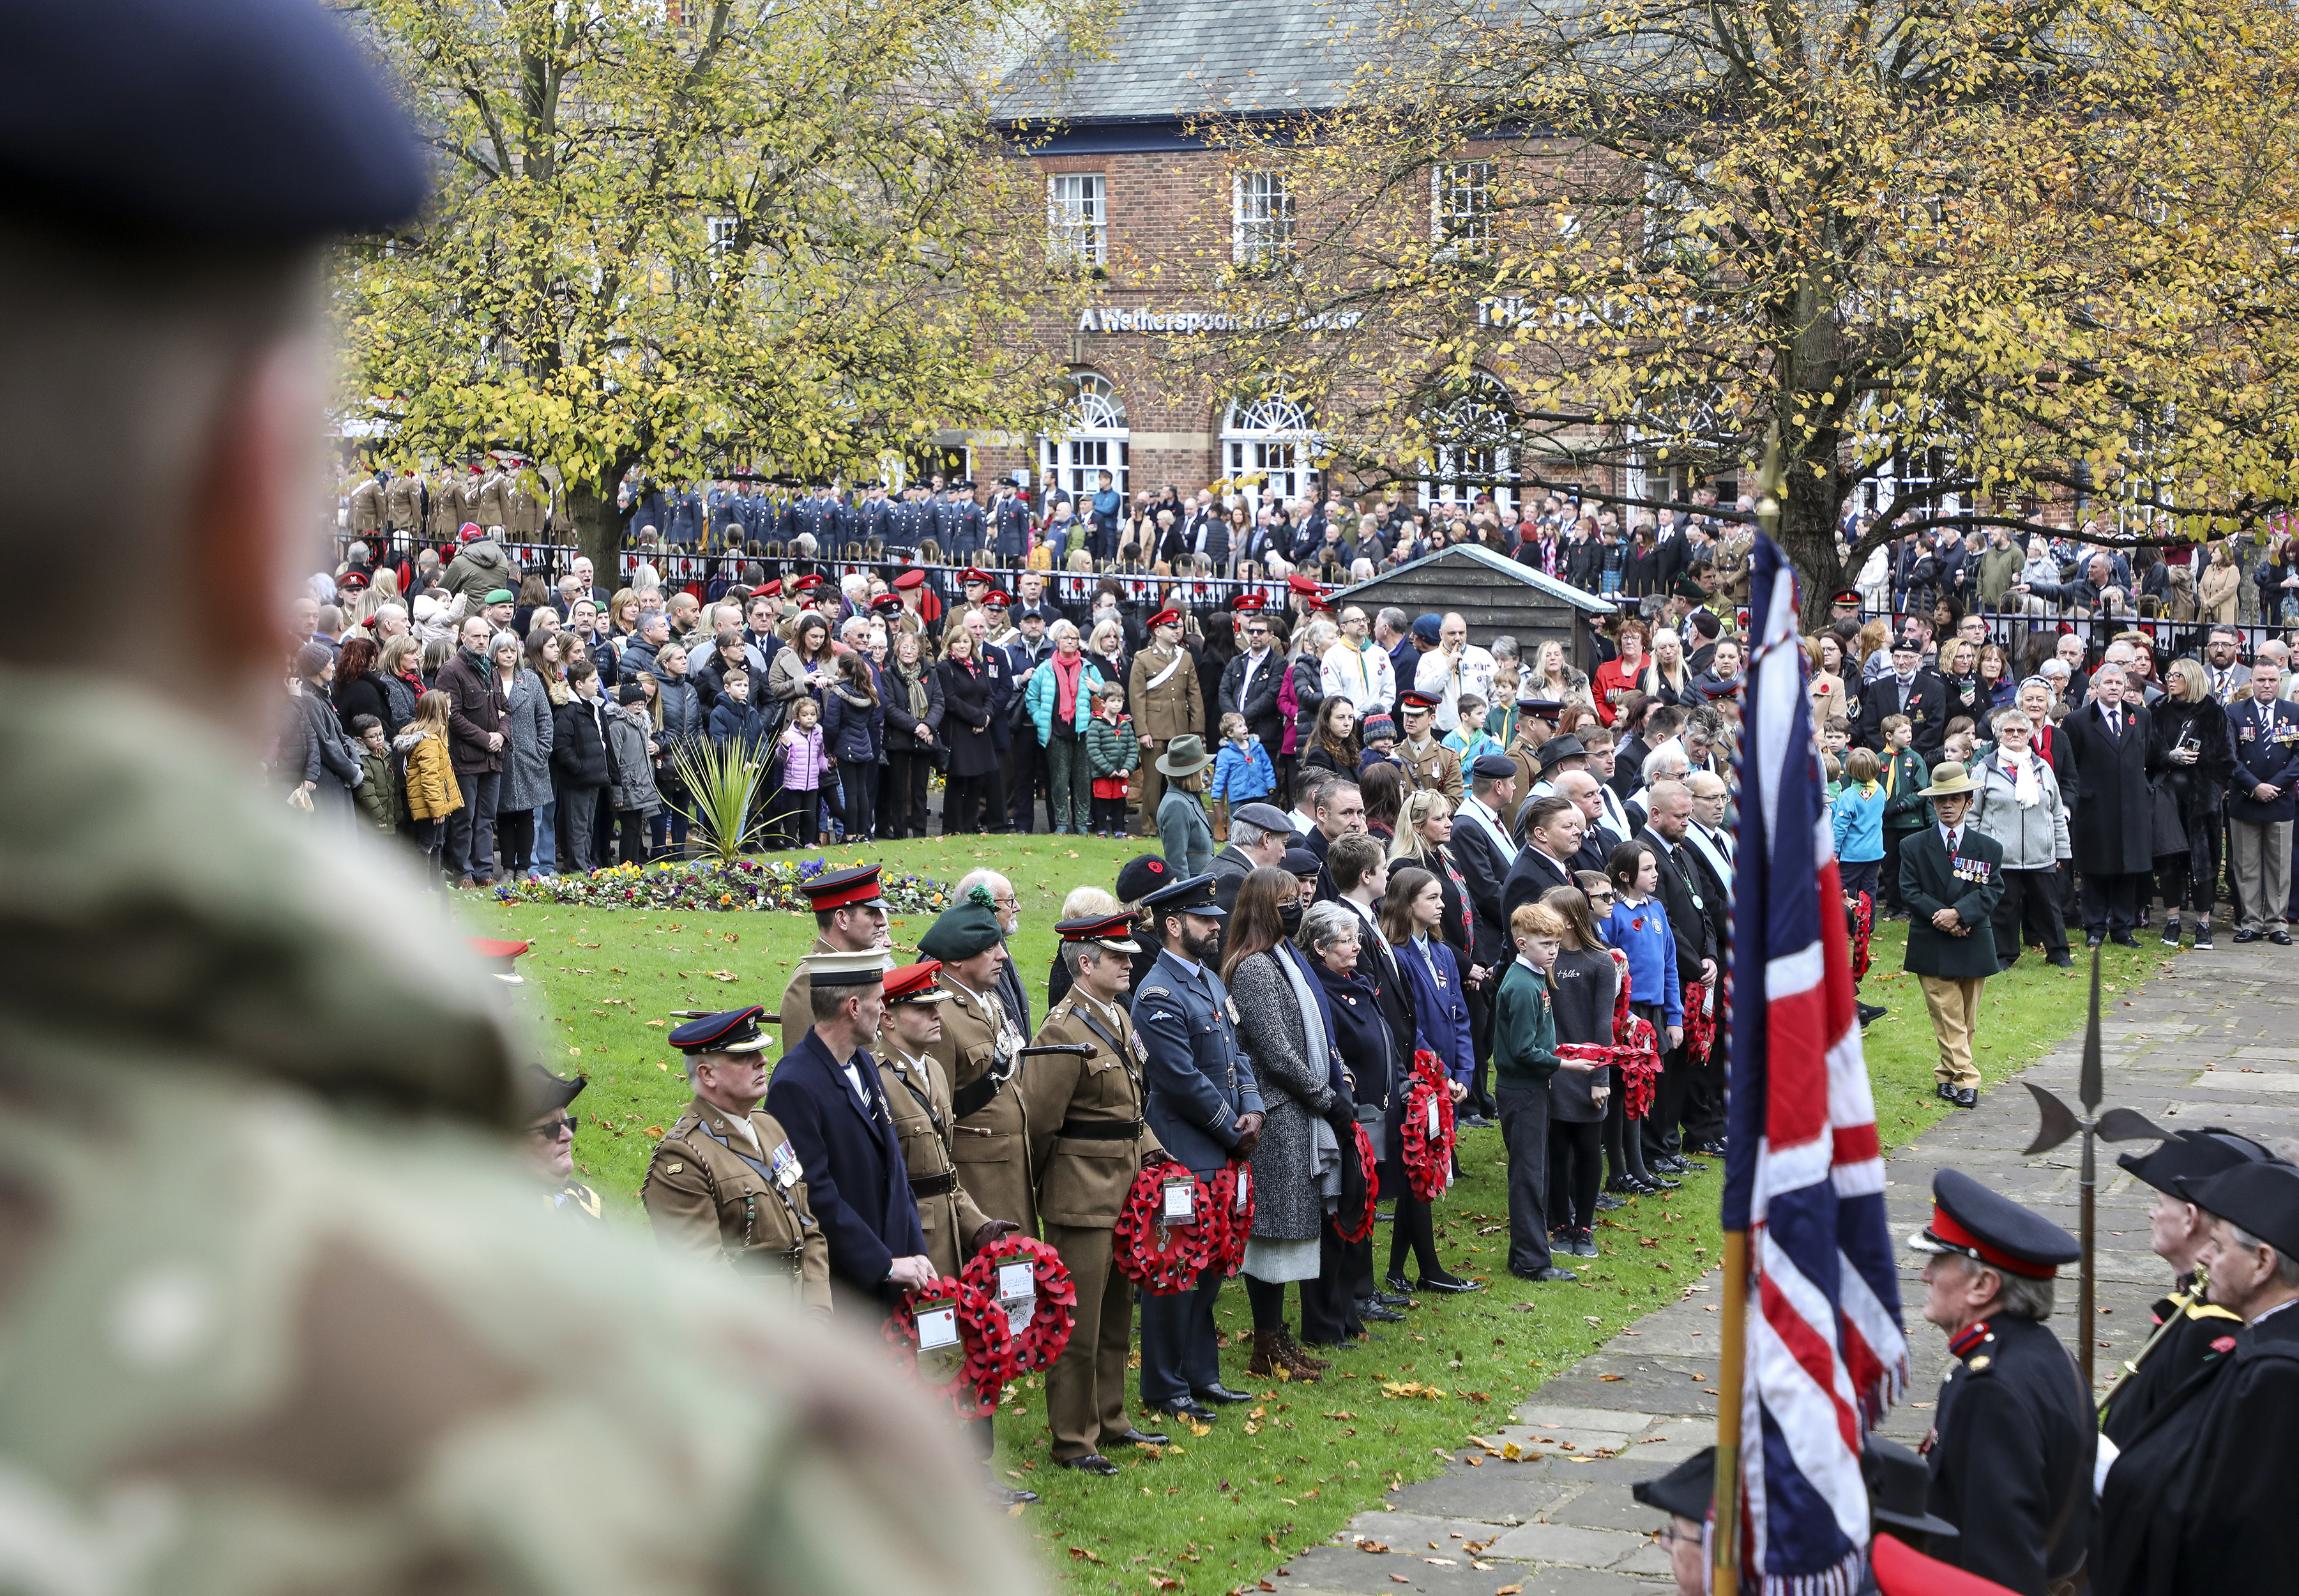 Personnel during Remembrance Service.